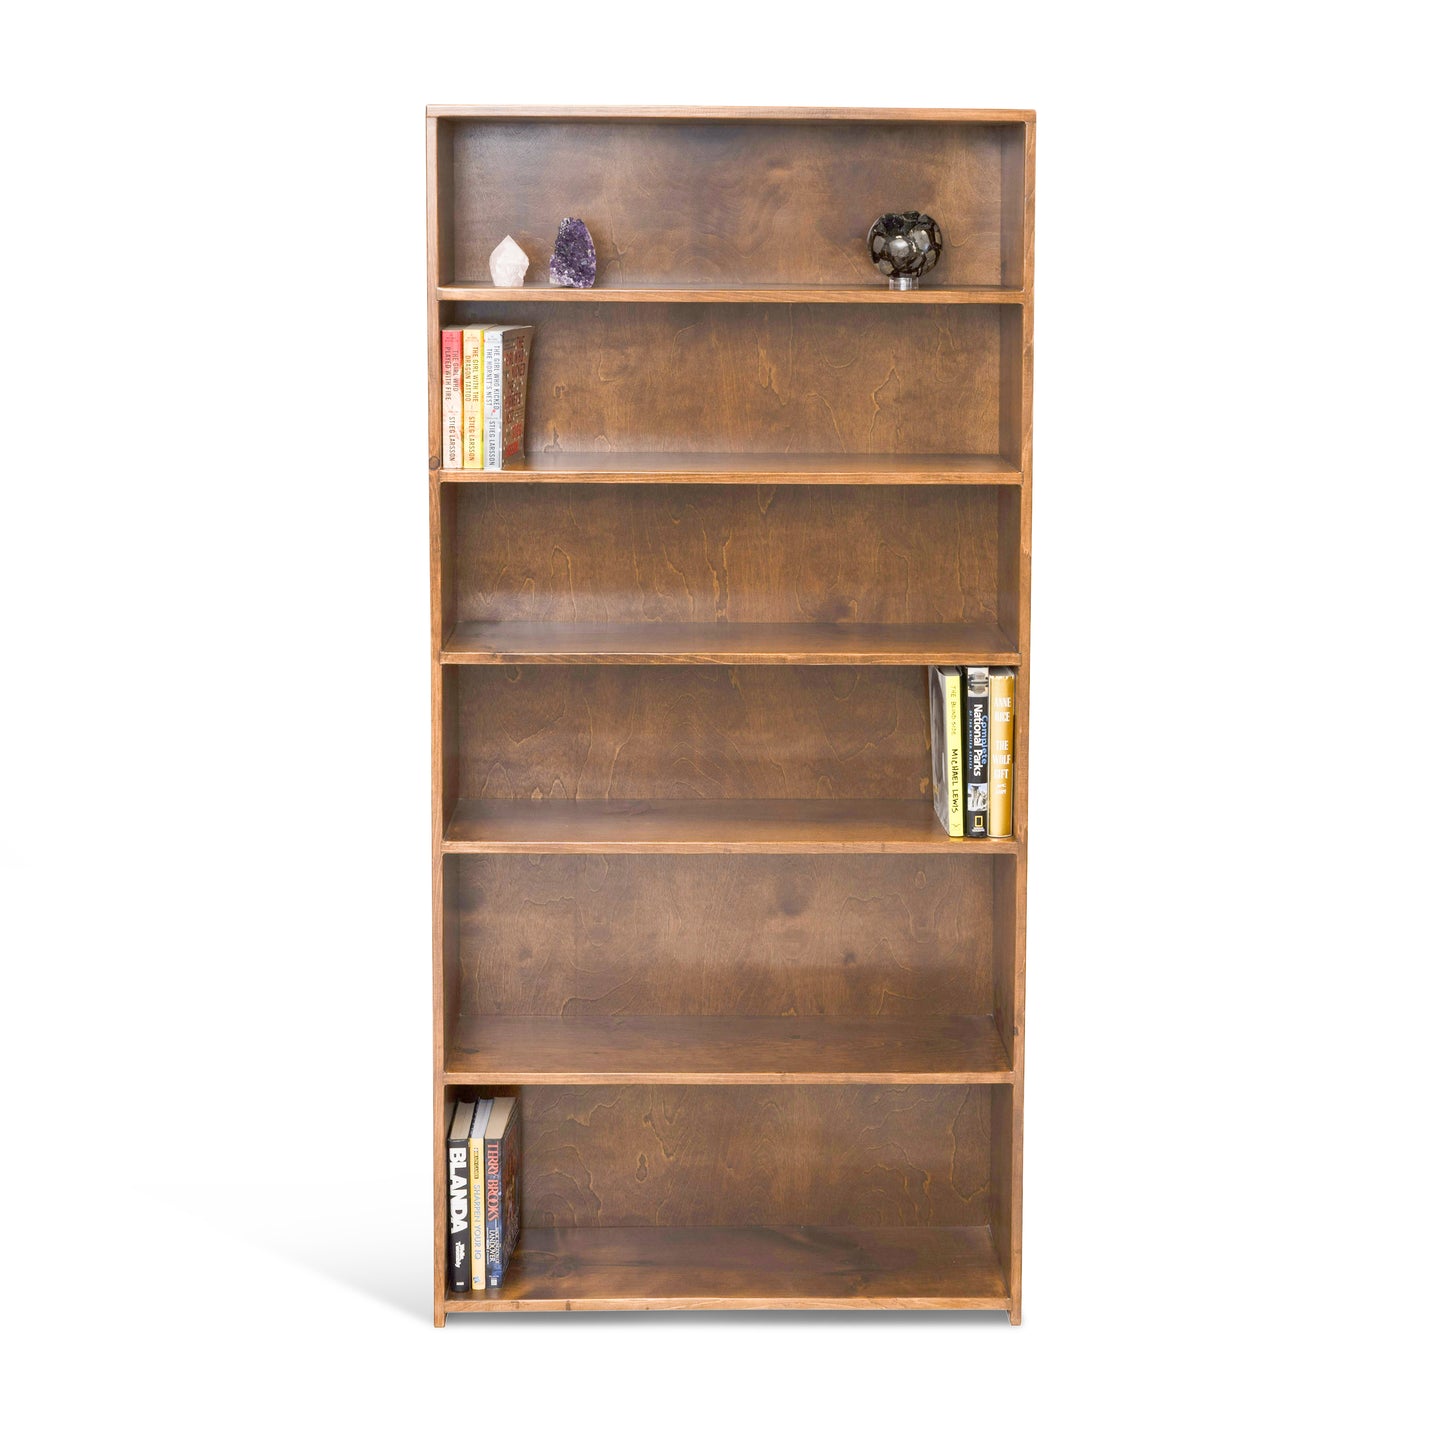 Evergreen Bookcase with 9-1/4" depth in Toffee finish. Built from pine.